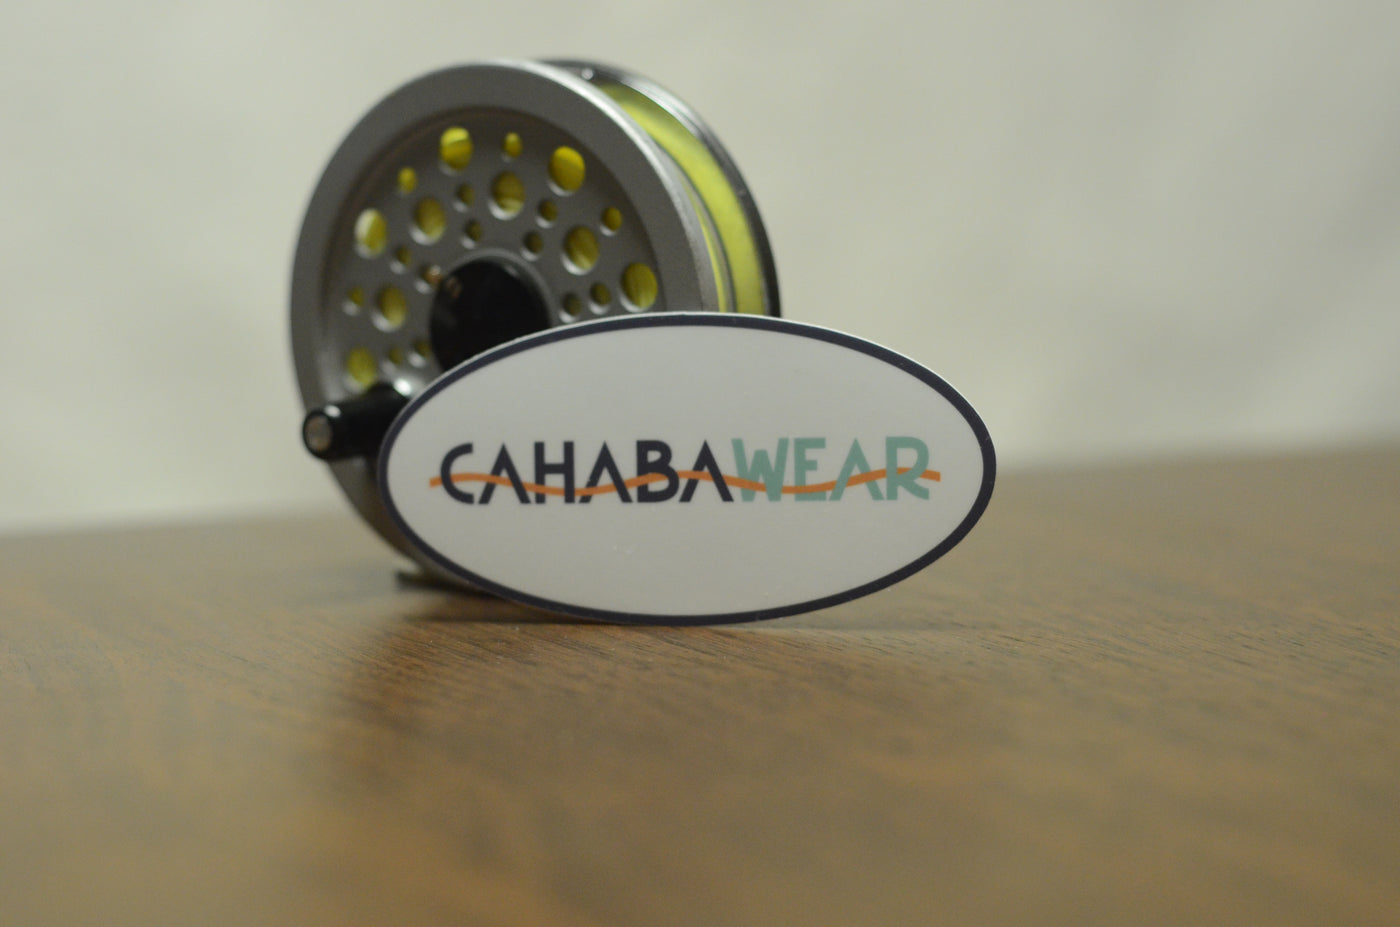 Cahabawear River Oval Sticker